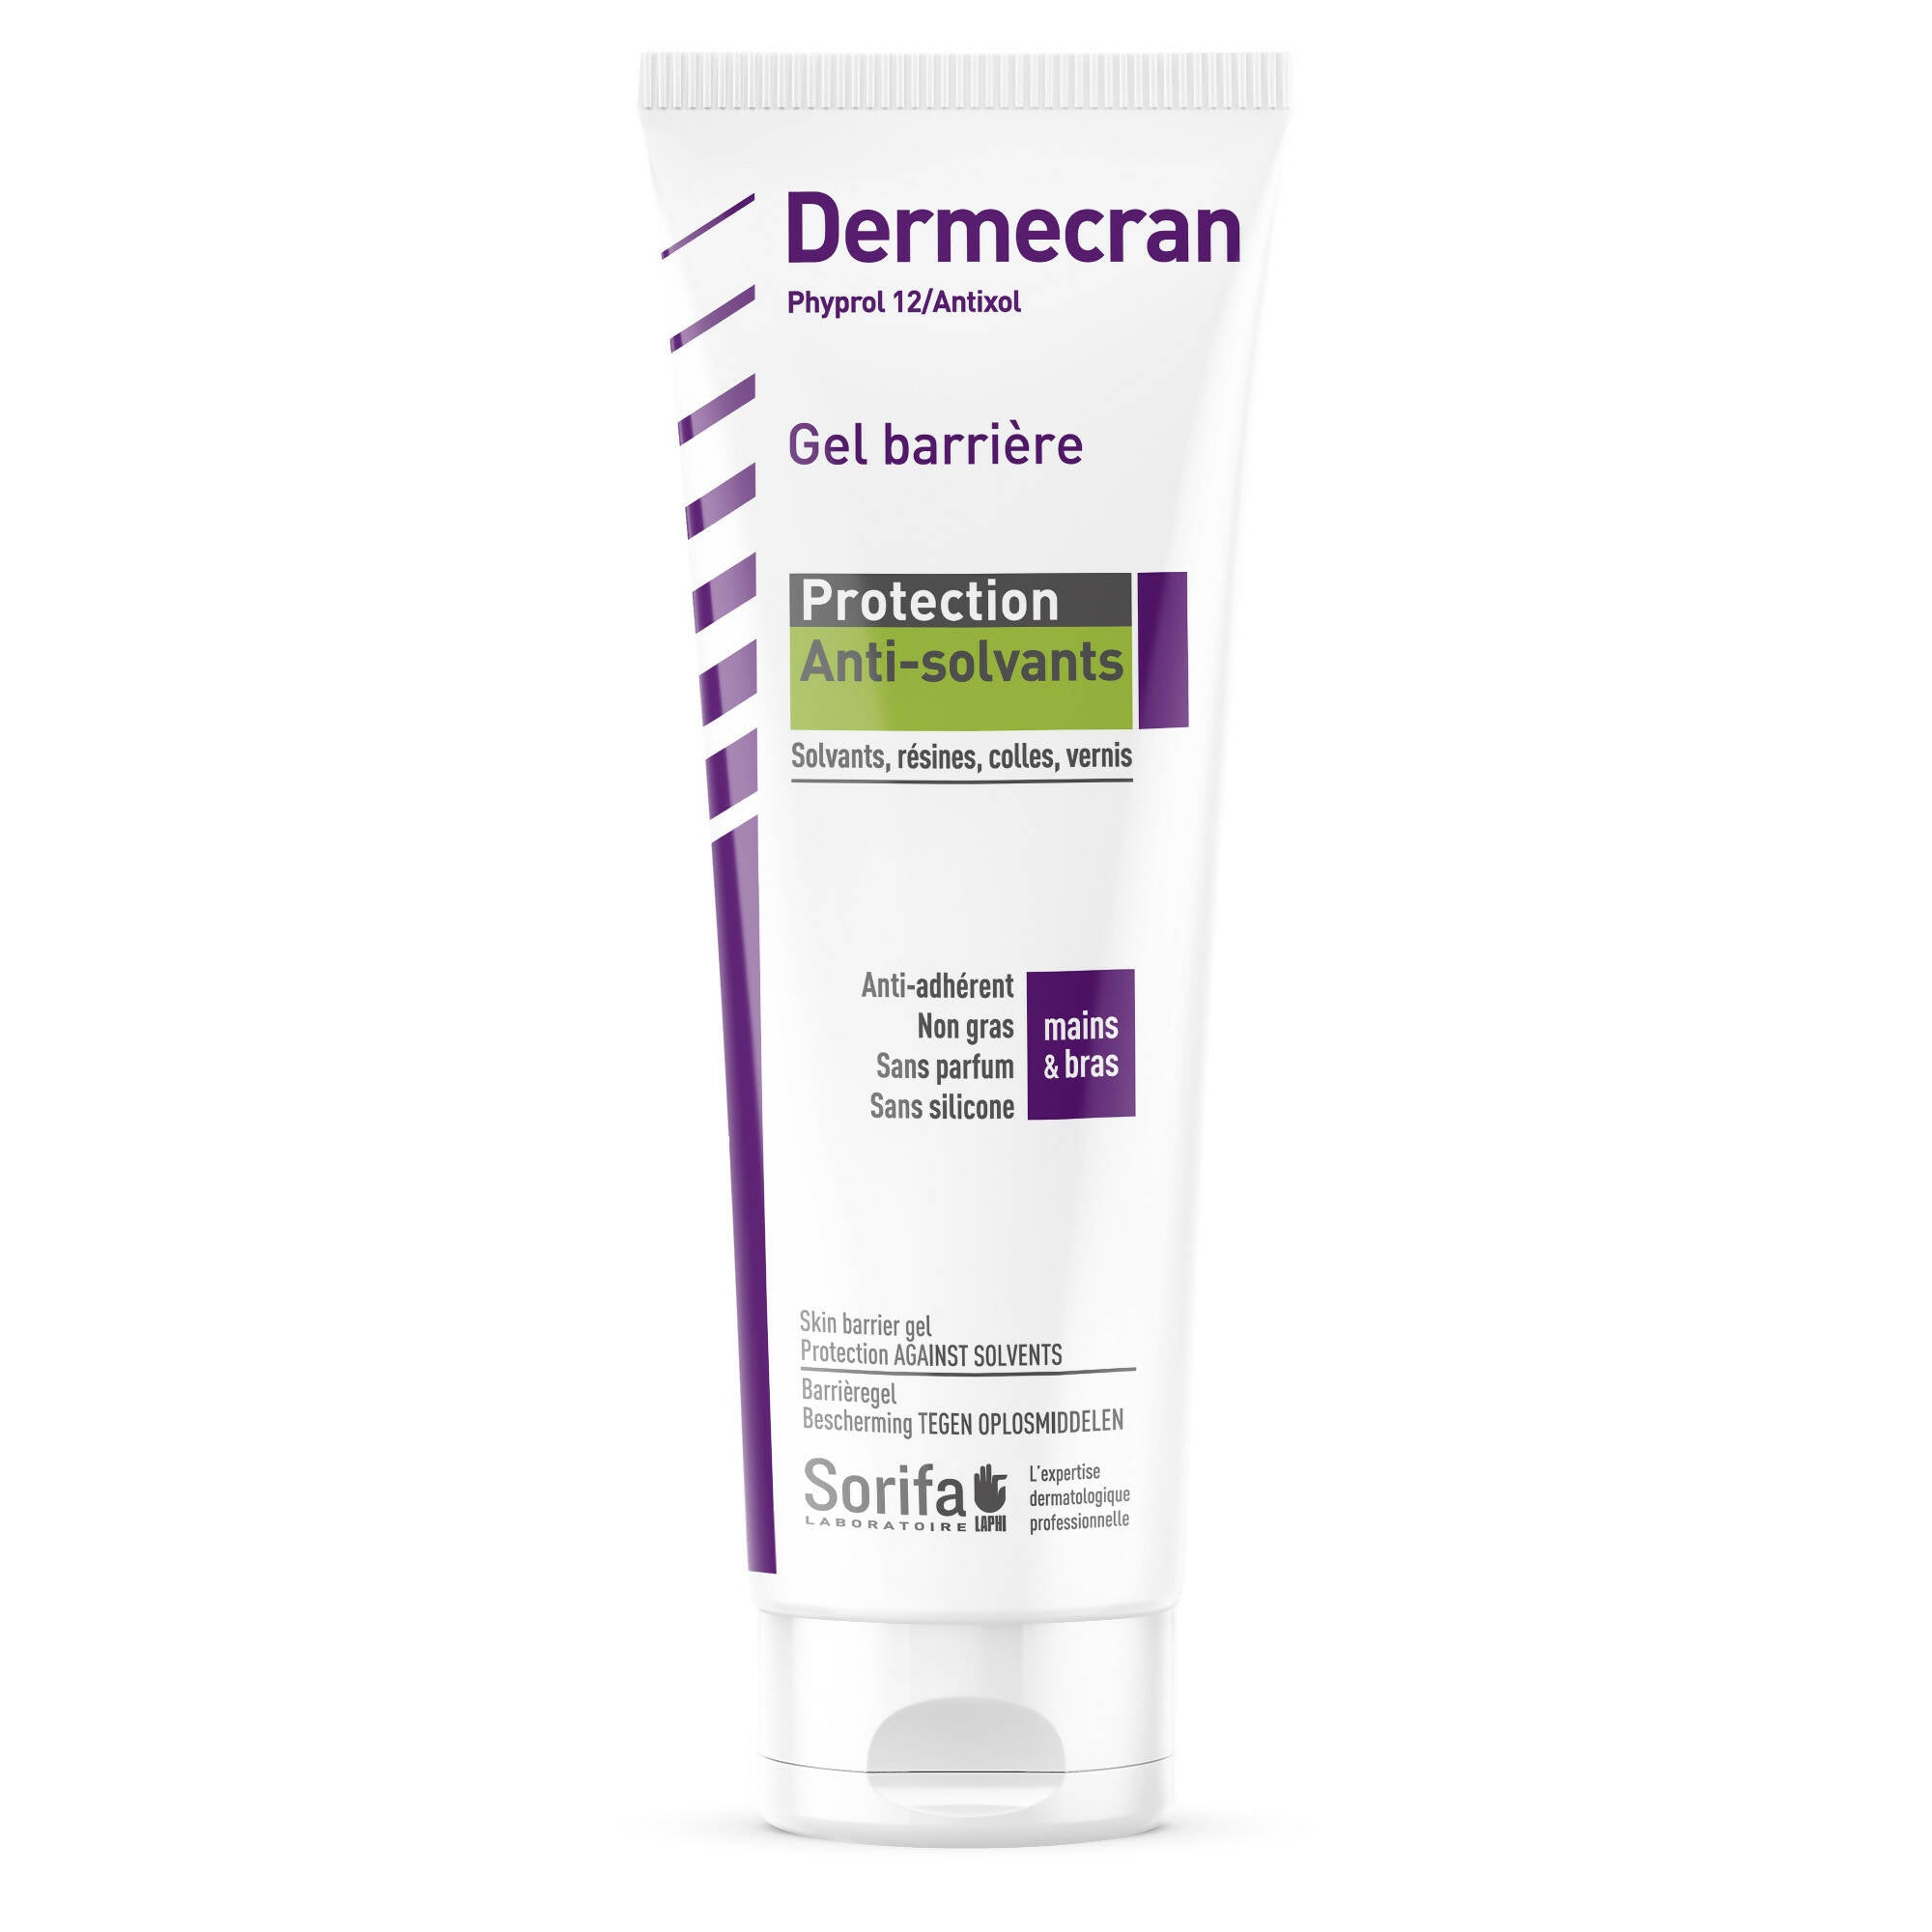 SORIFA - Pack of 20 - Dermscreen - Barrier gel - ANTI-SOLVENT protection - Solvents, resins, glues, varnishes - Hands, face, body - High tolerance formula - Fragrance-free - 125 ml tube. - 0